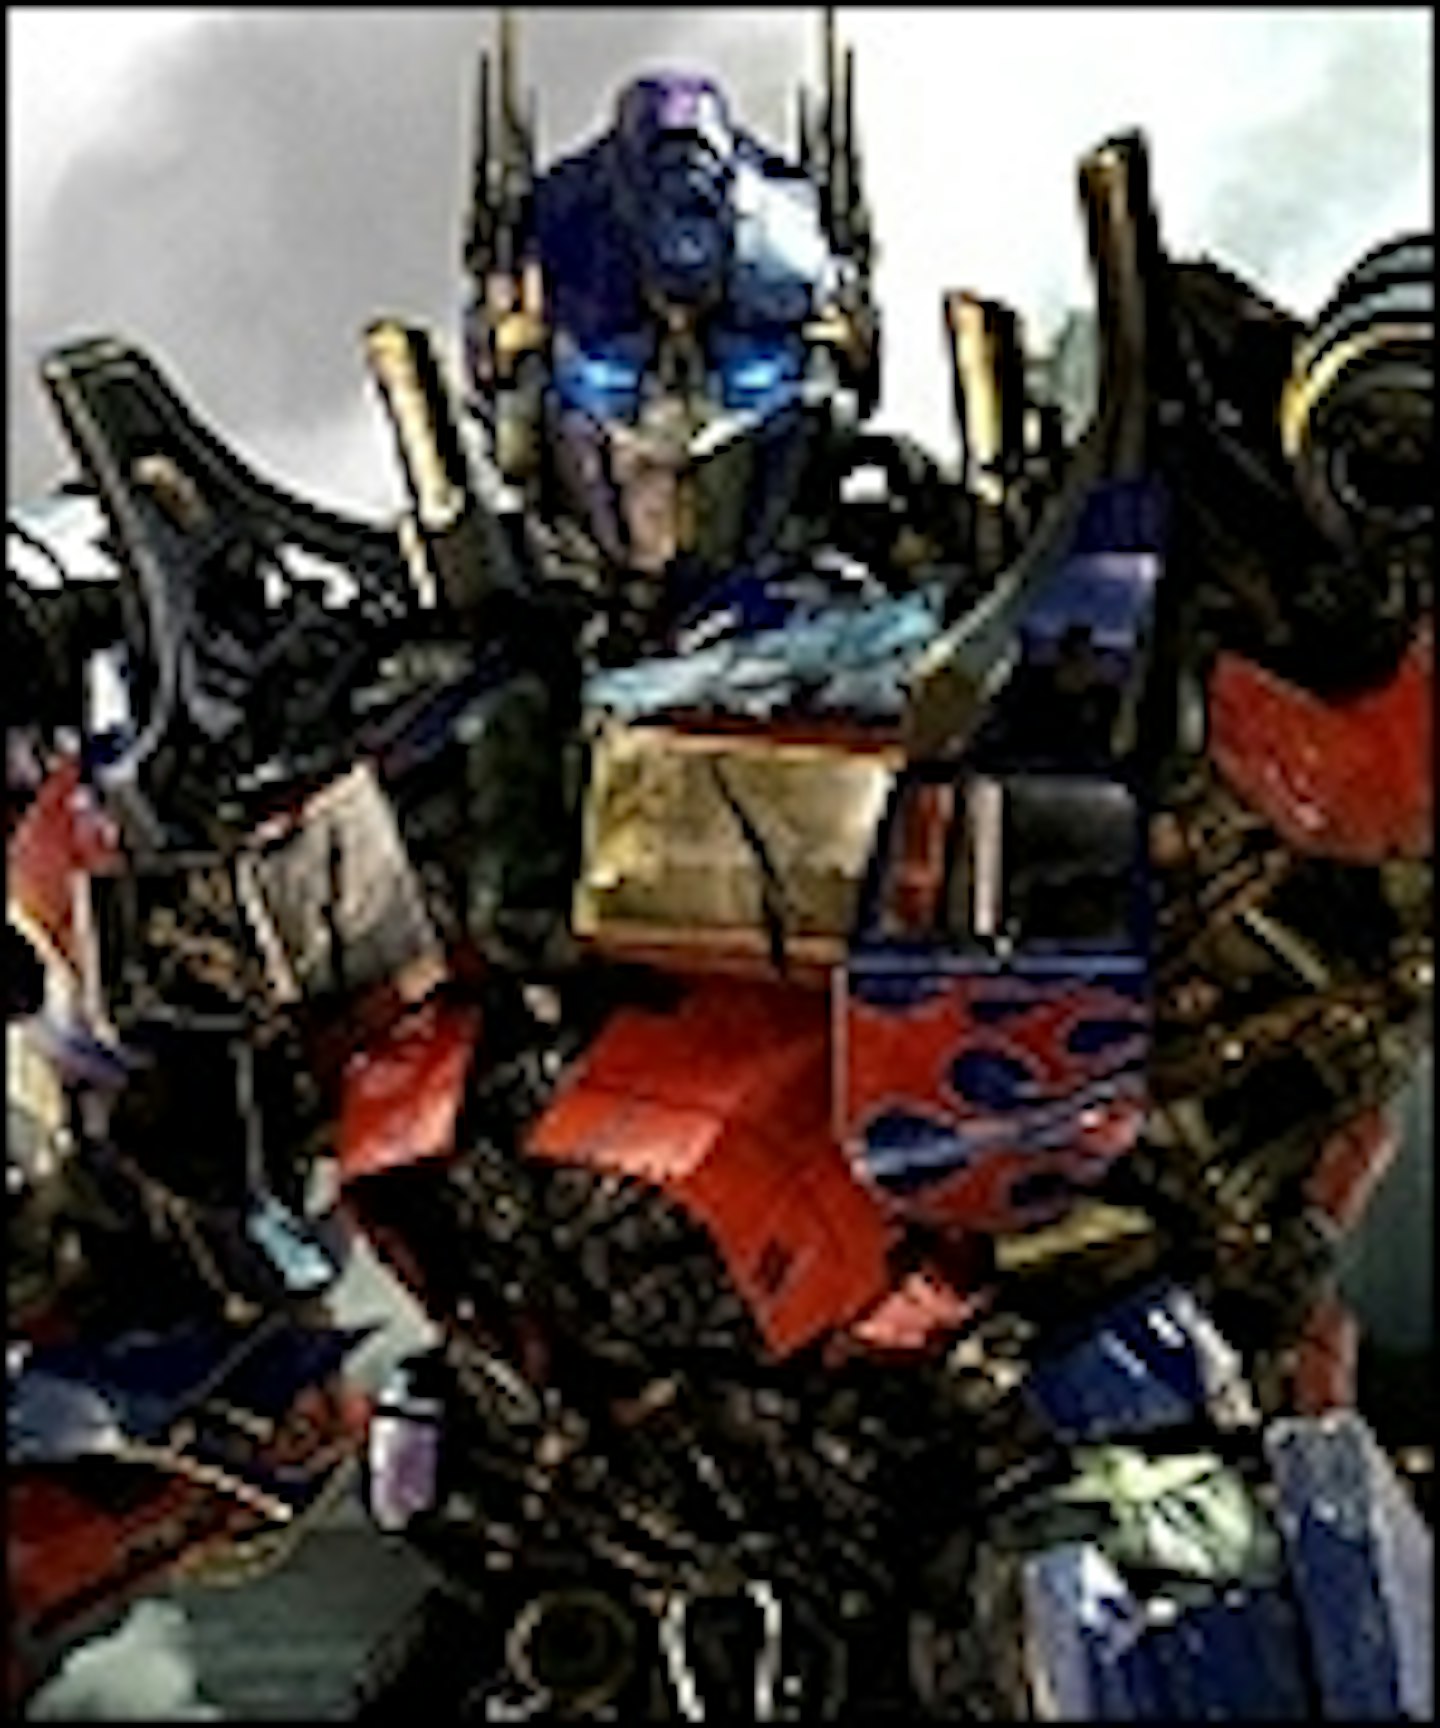 Another Transformers 3 Trailer Arrives